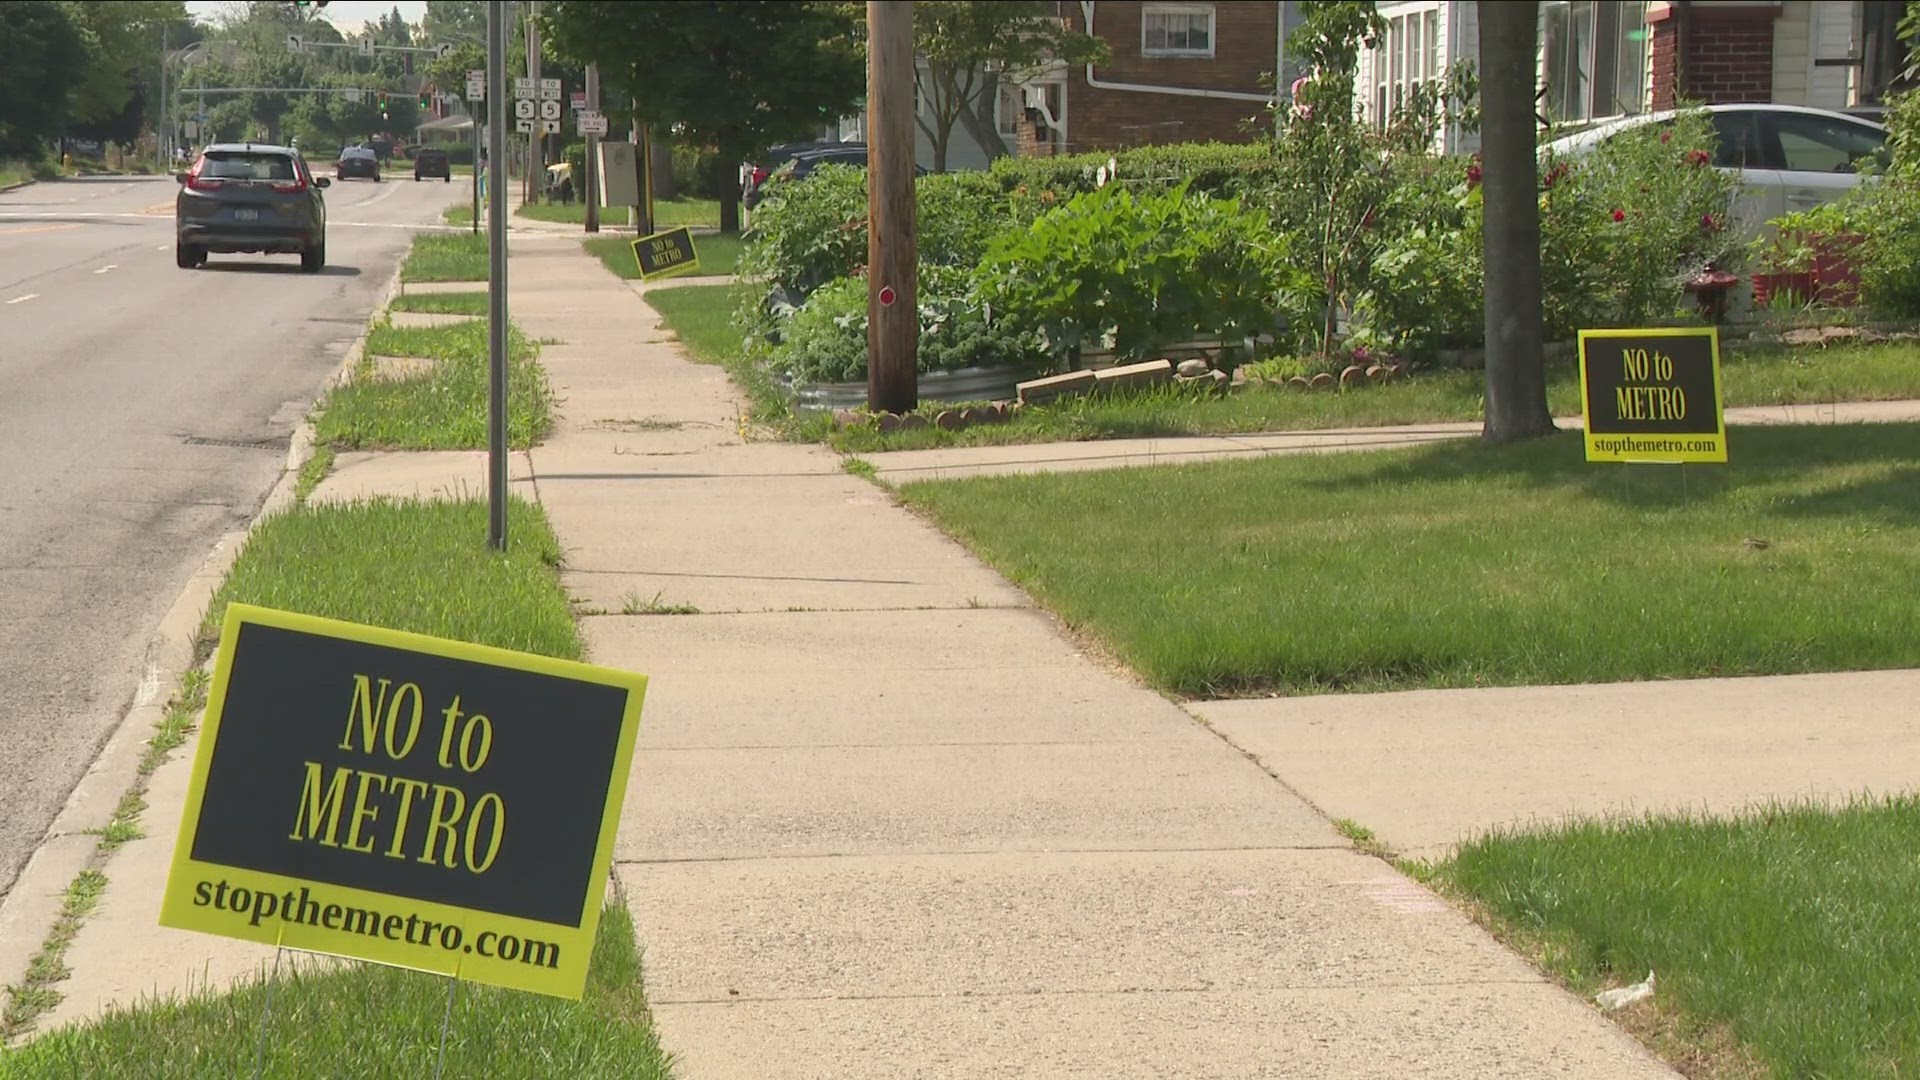 opposition are popping up along niagara falls boulevard, as a recently formed group gathers petitions in their effort to stop the metro rail expansion in its tracks